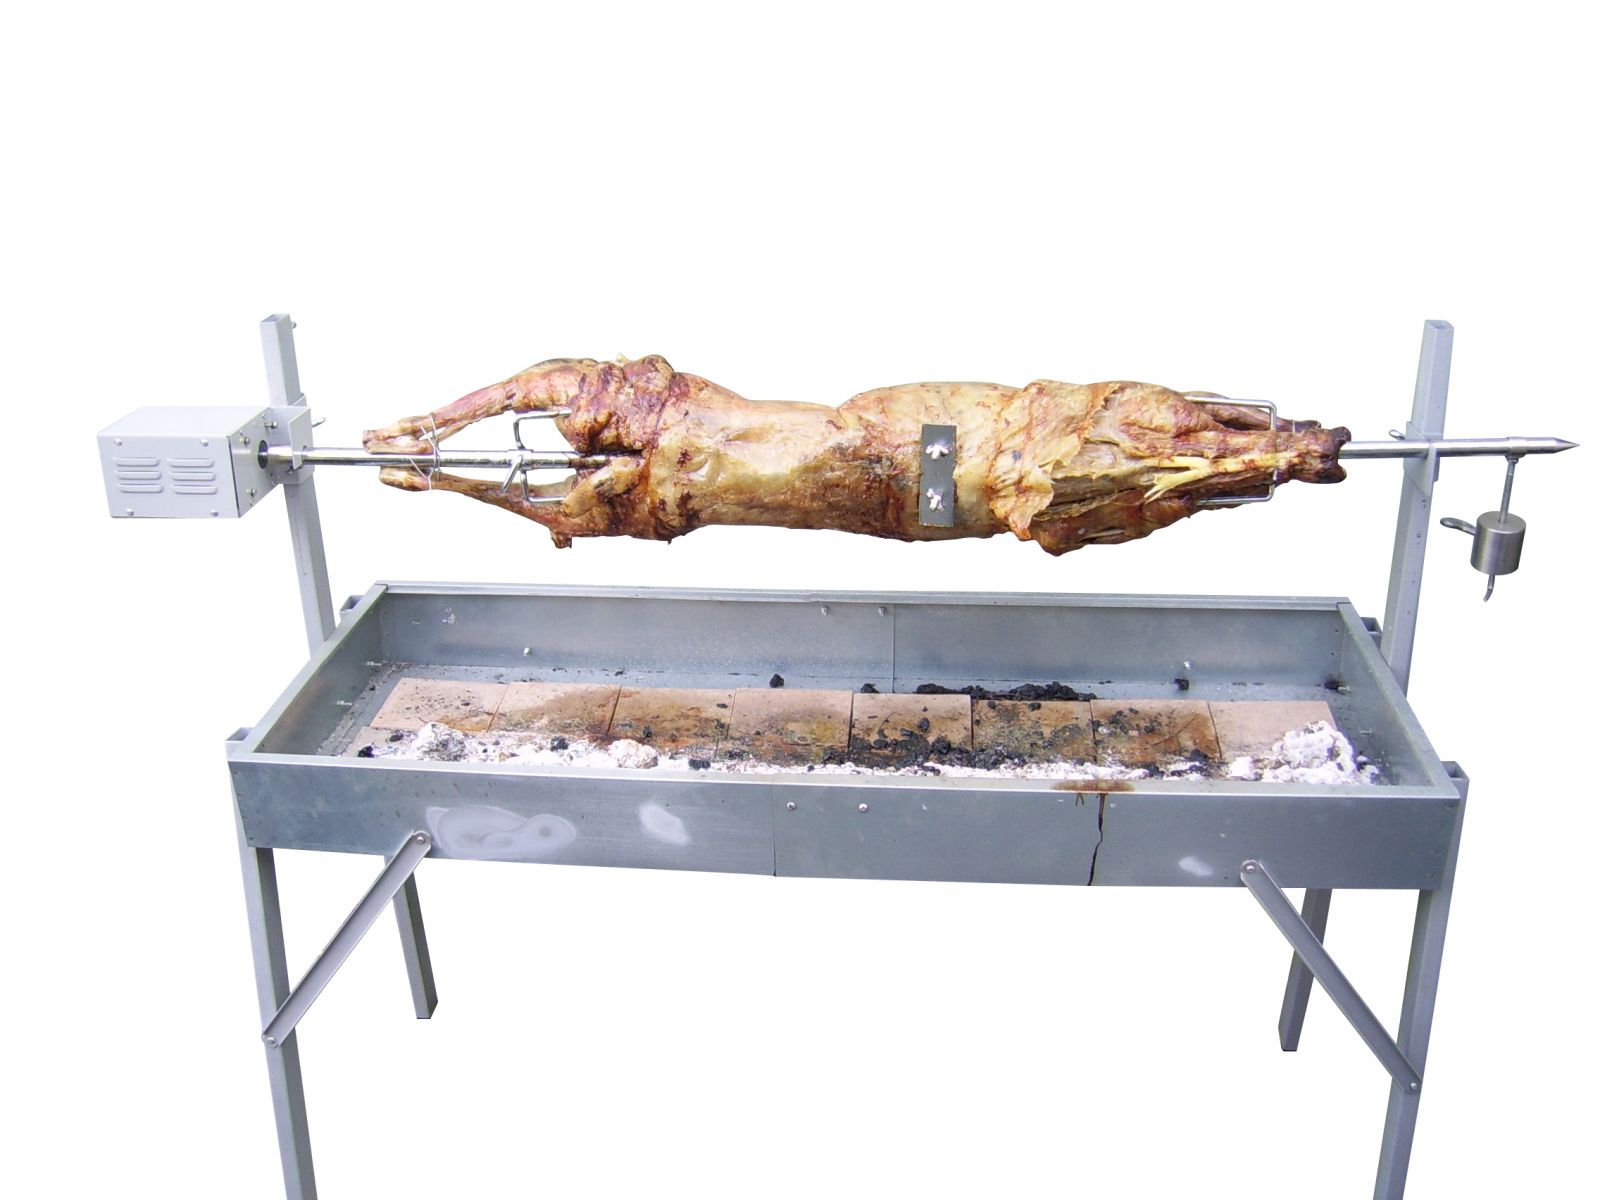 How to Balance a Lamb on a Spit Roaster